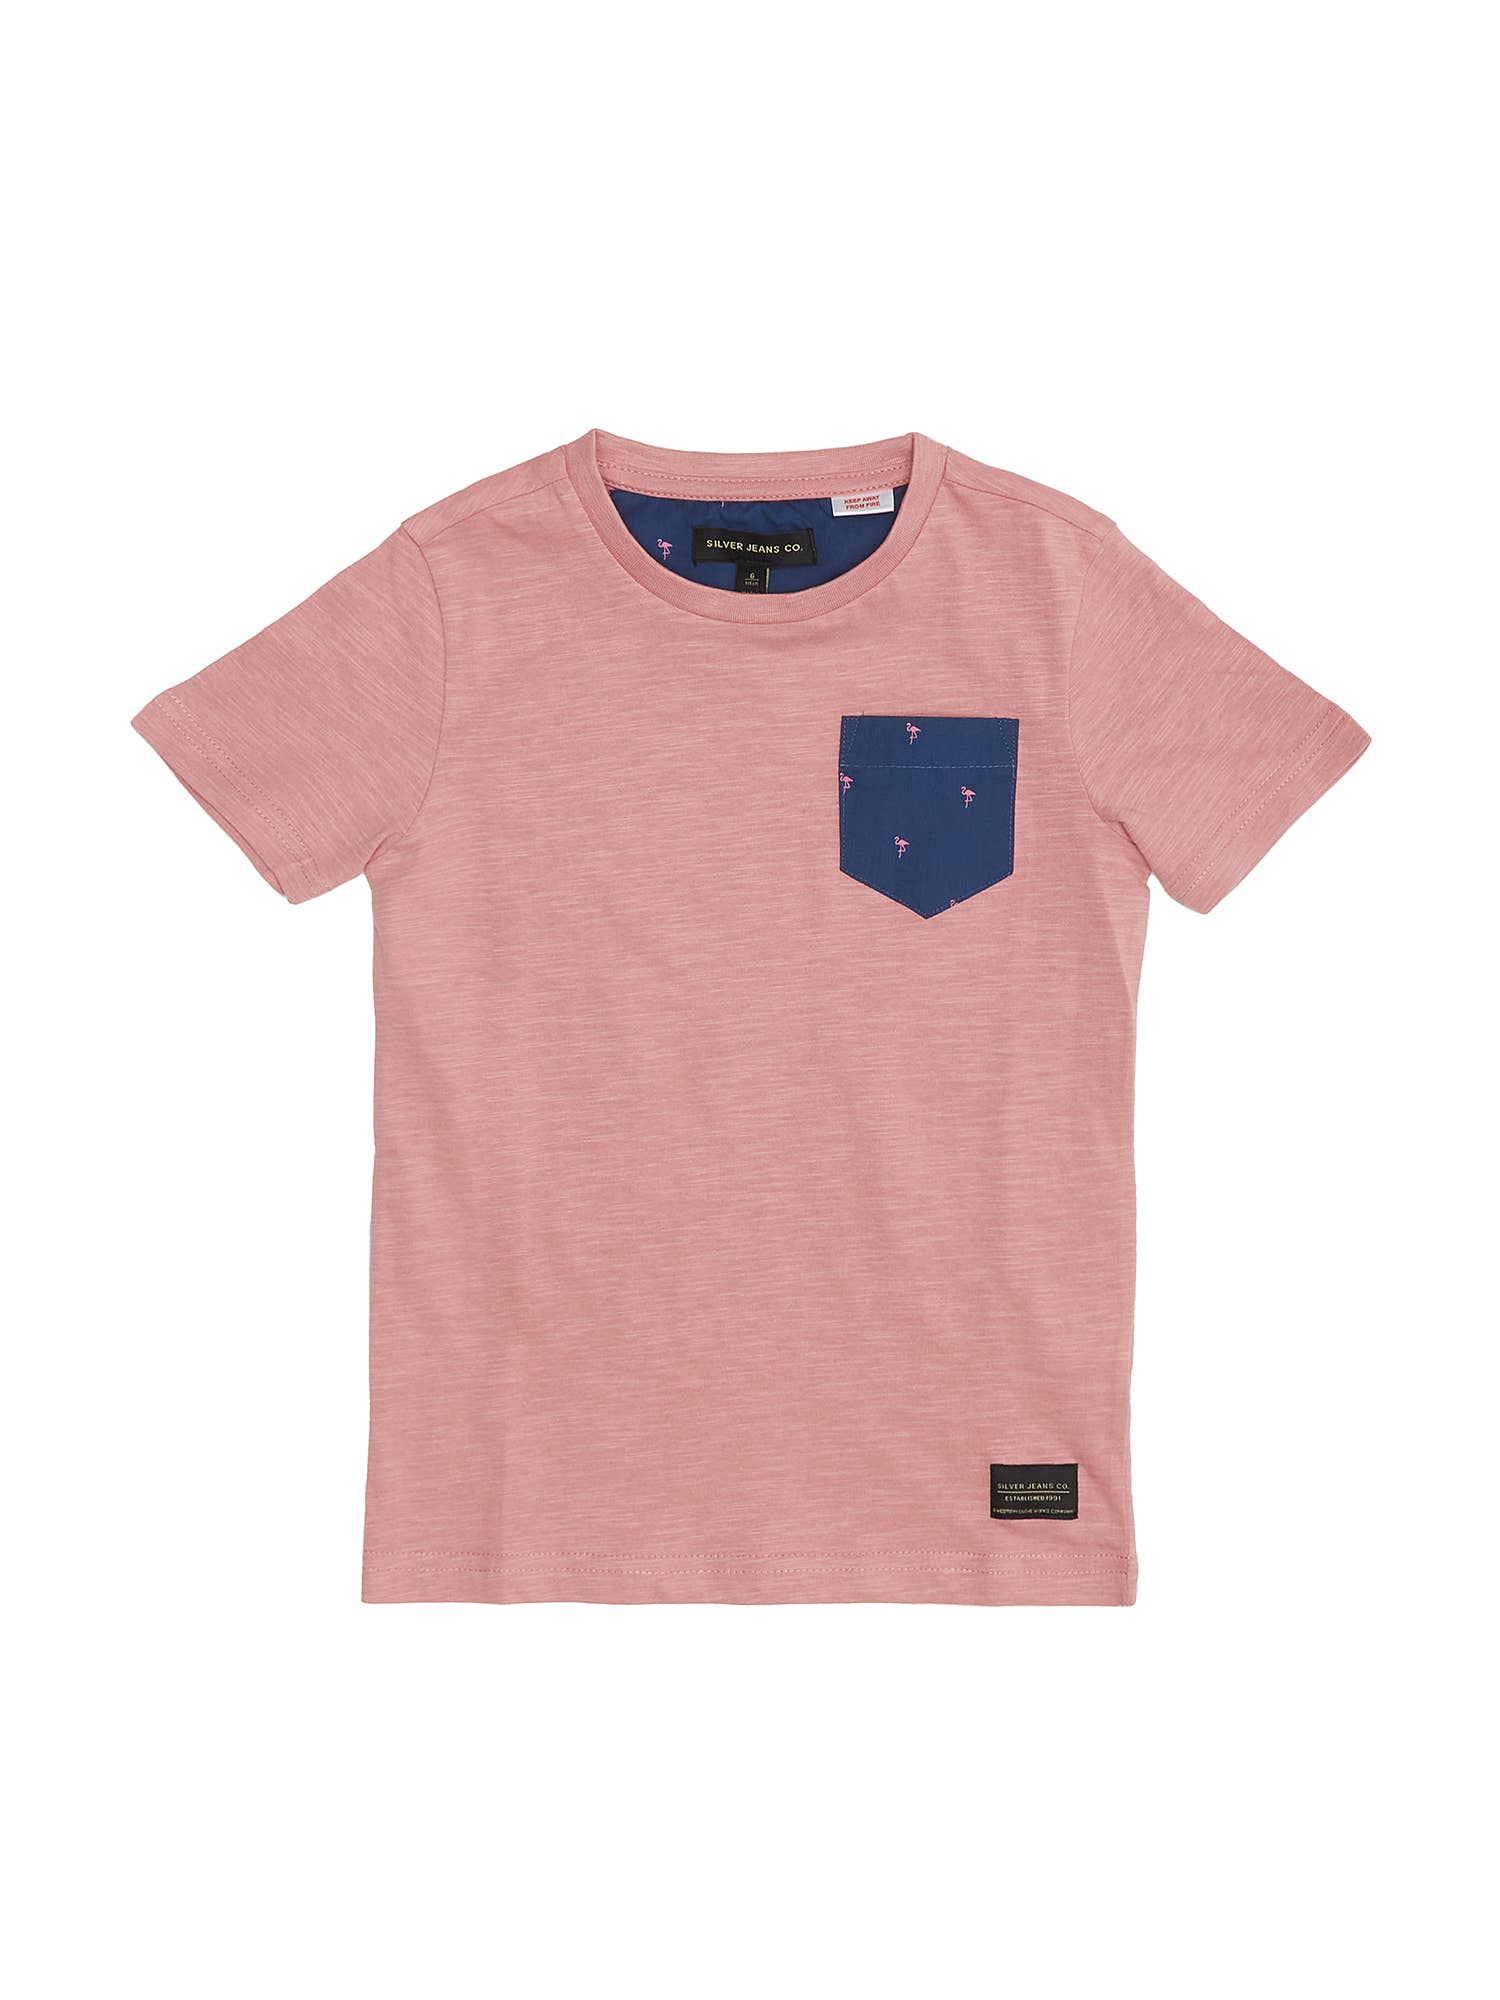 Silver Jeans - SBS235943 - BOYS T-SHIRT WITH CONTRAST POCKET - Pink & Blue Kidz Clothing